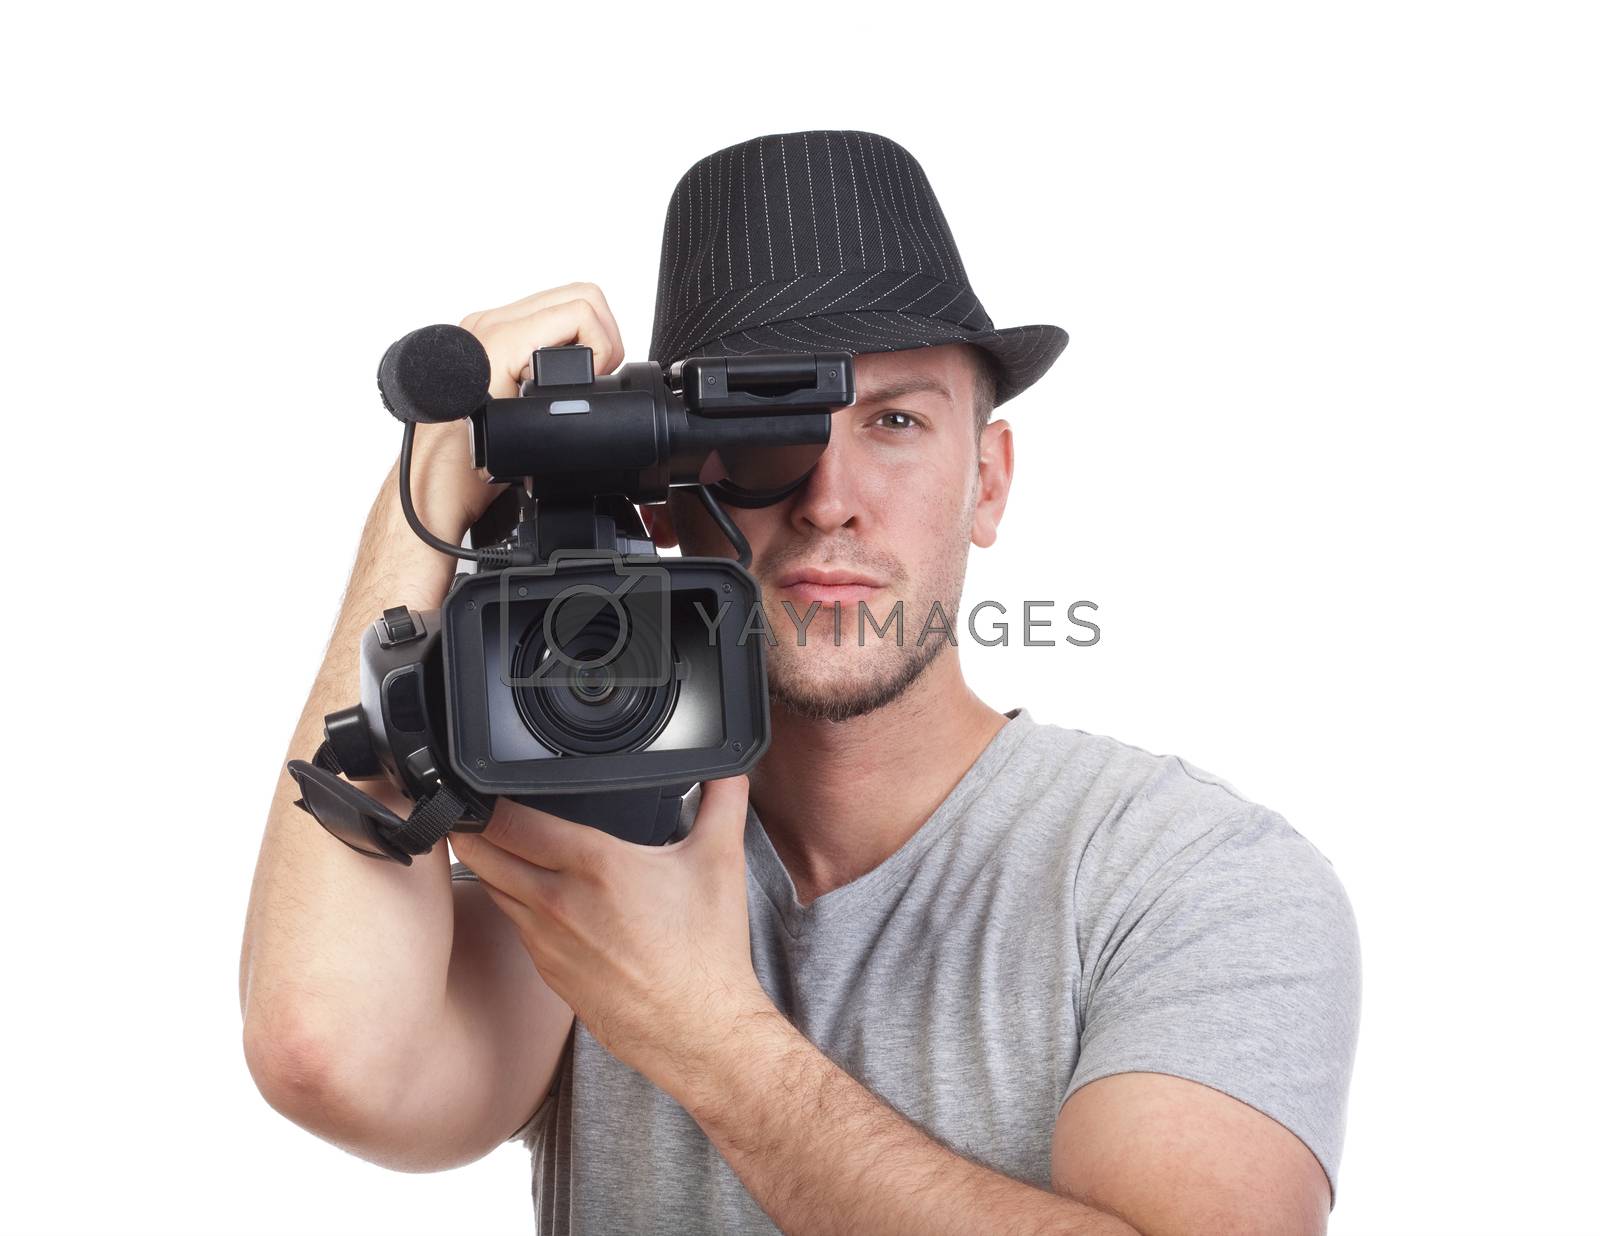 Royalty free image of man with video camera by courtyardpix